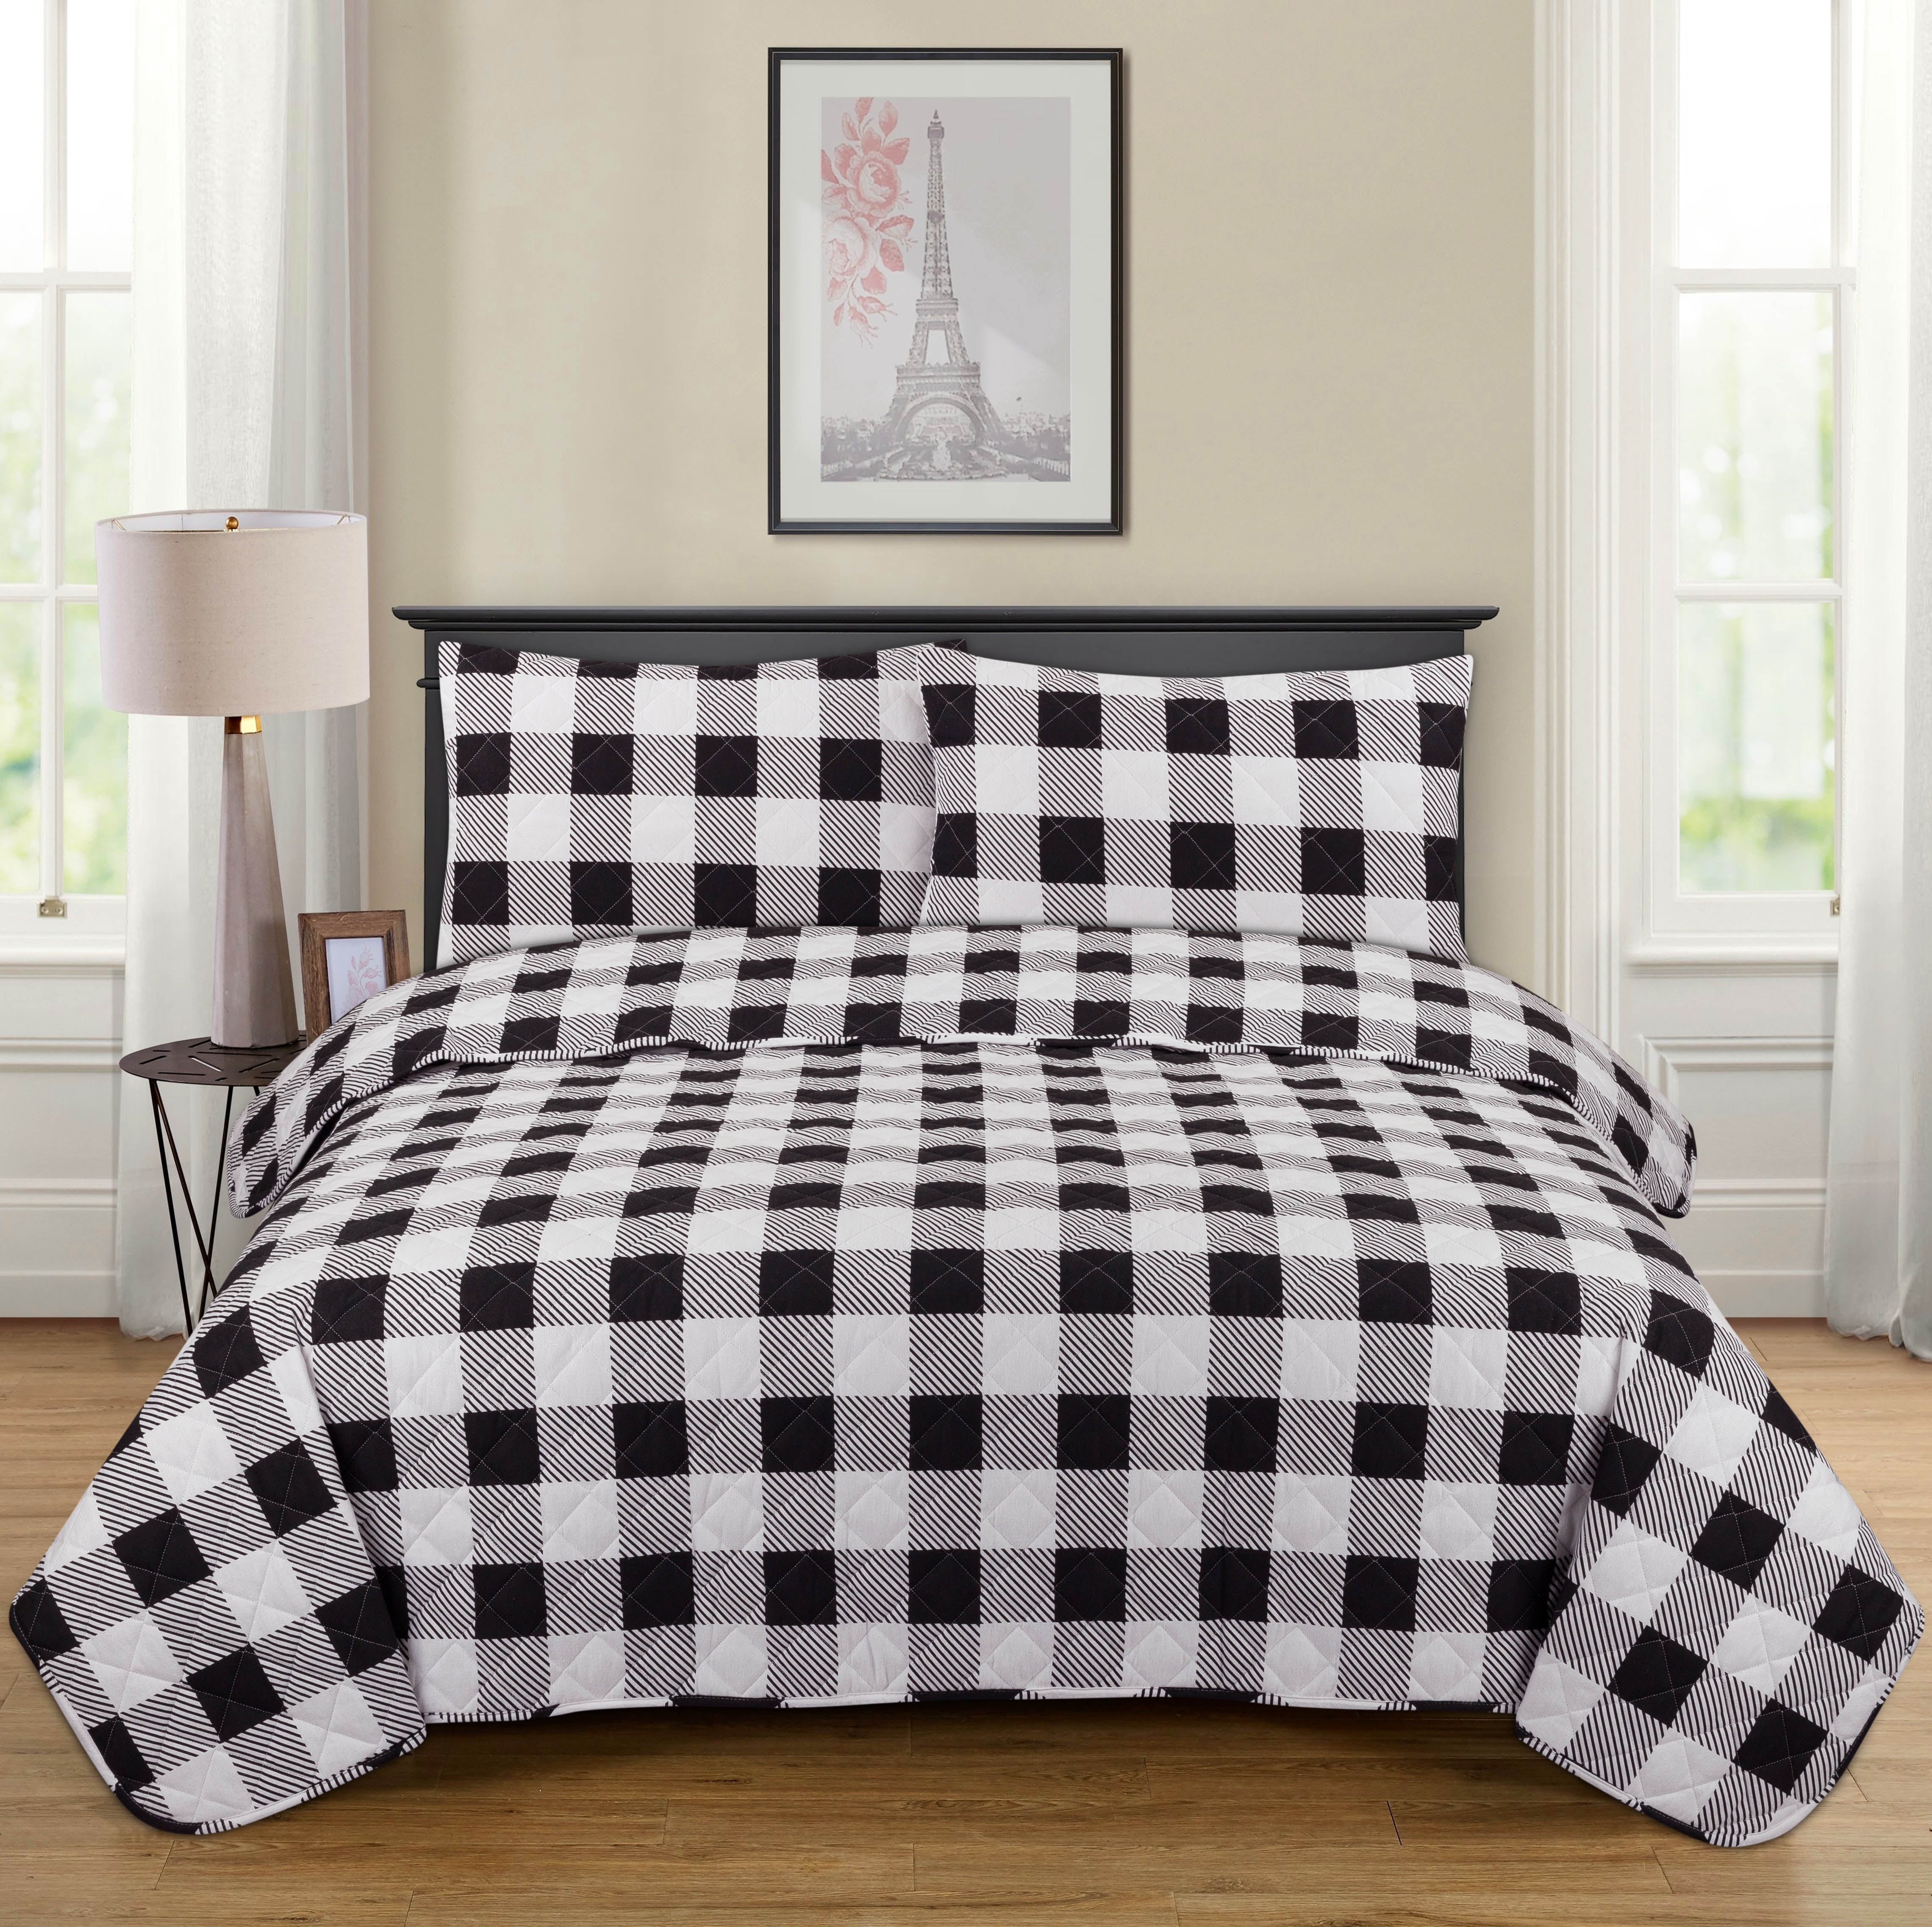 Mainstays Large Buffalo Plaid Flannel 2 Piece Twintwin Xl Quilt Set